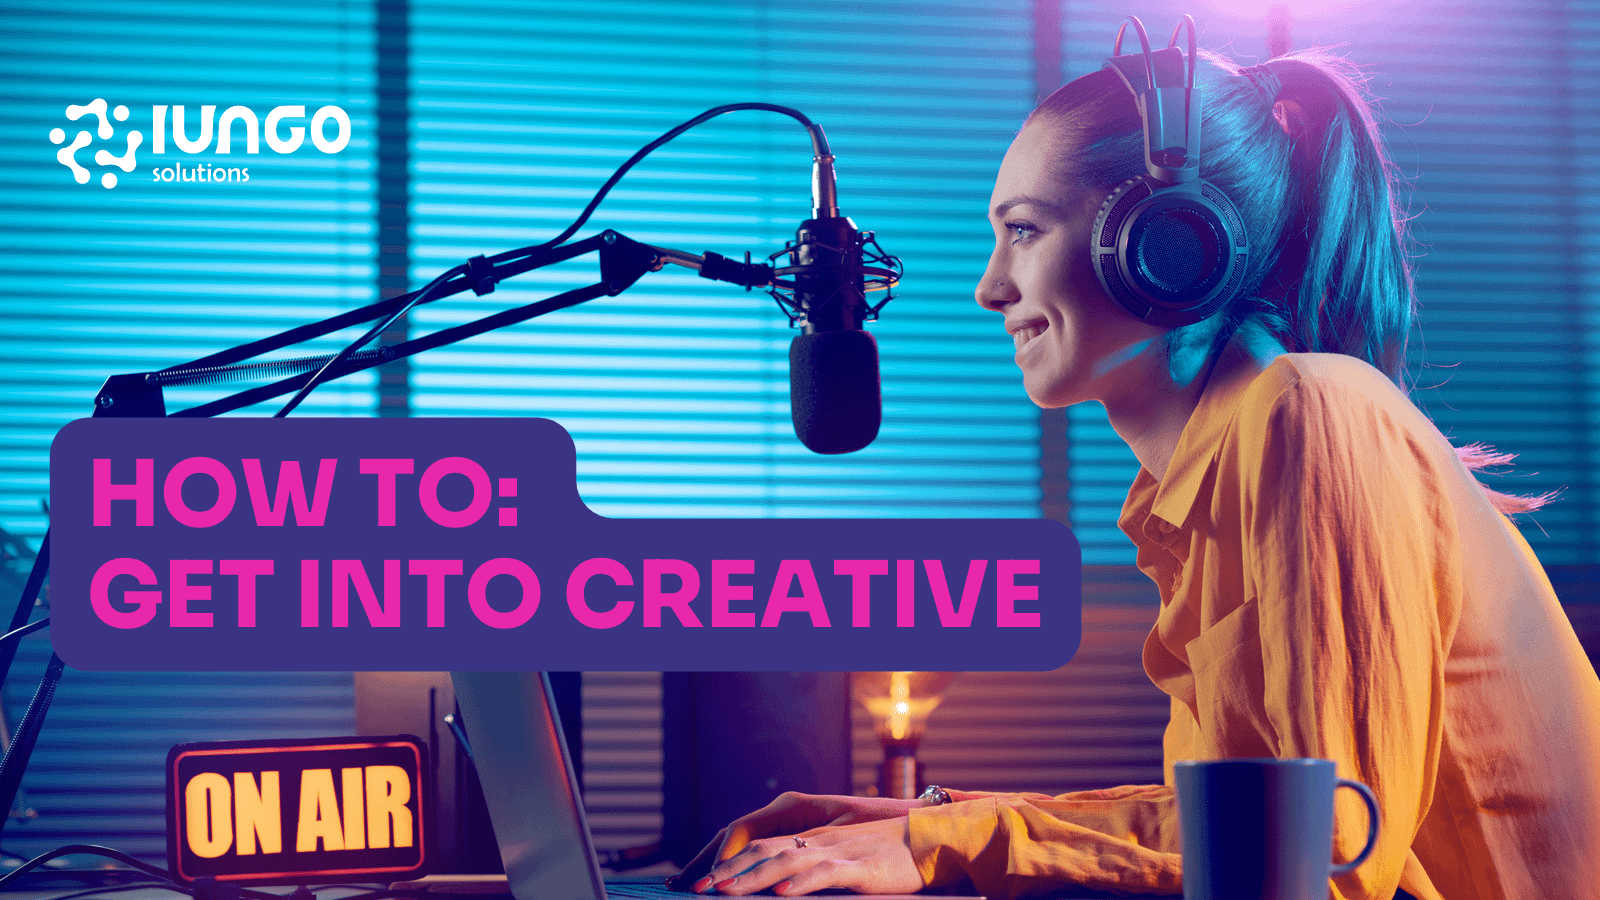 How to: Get into creative